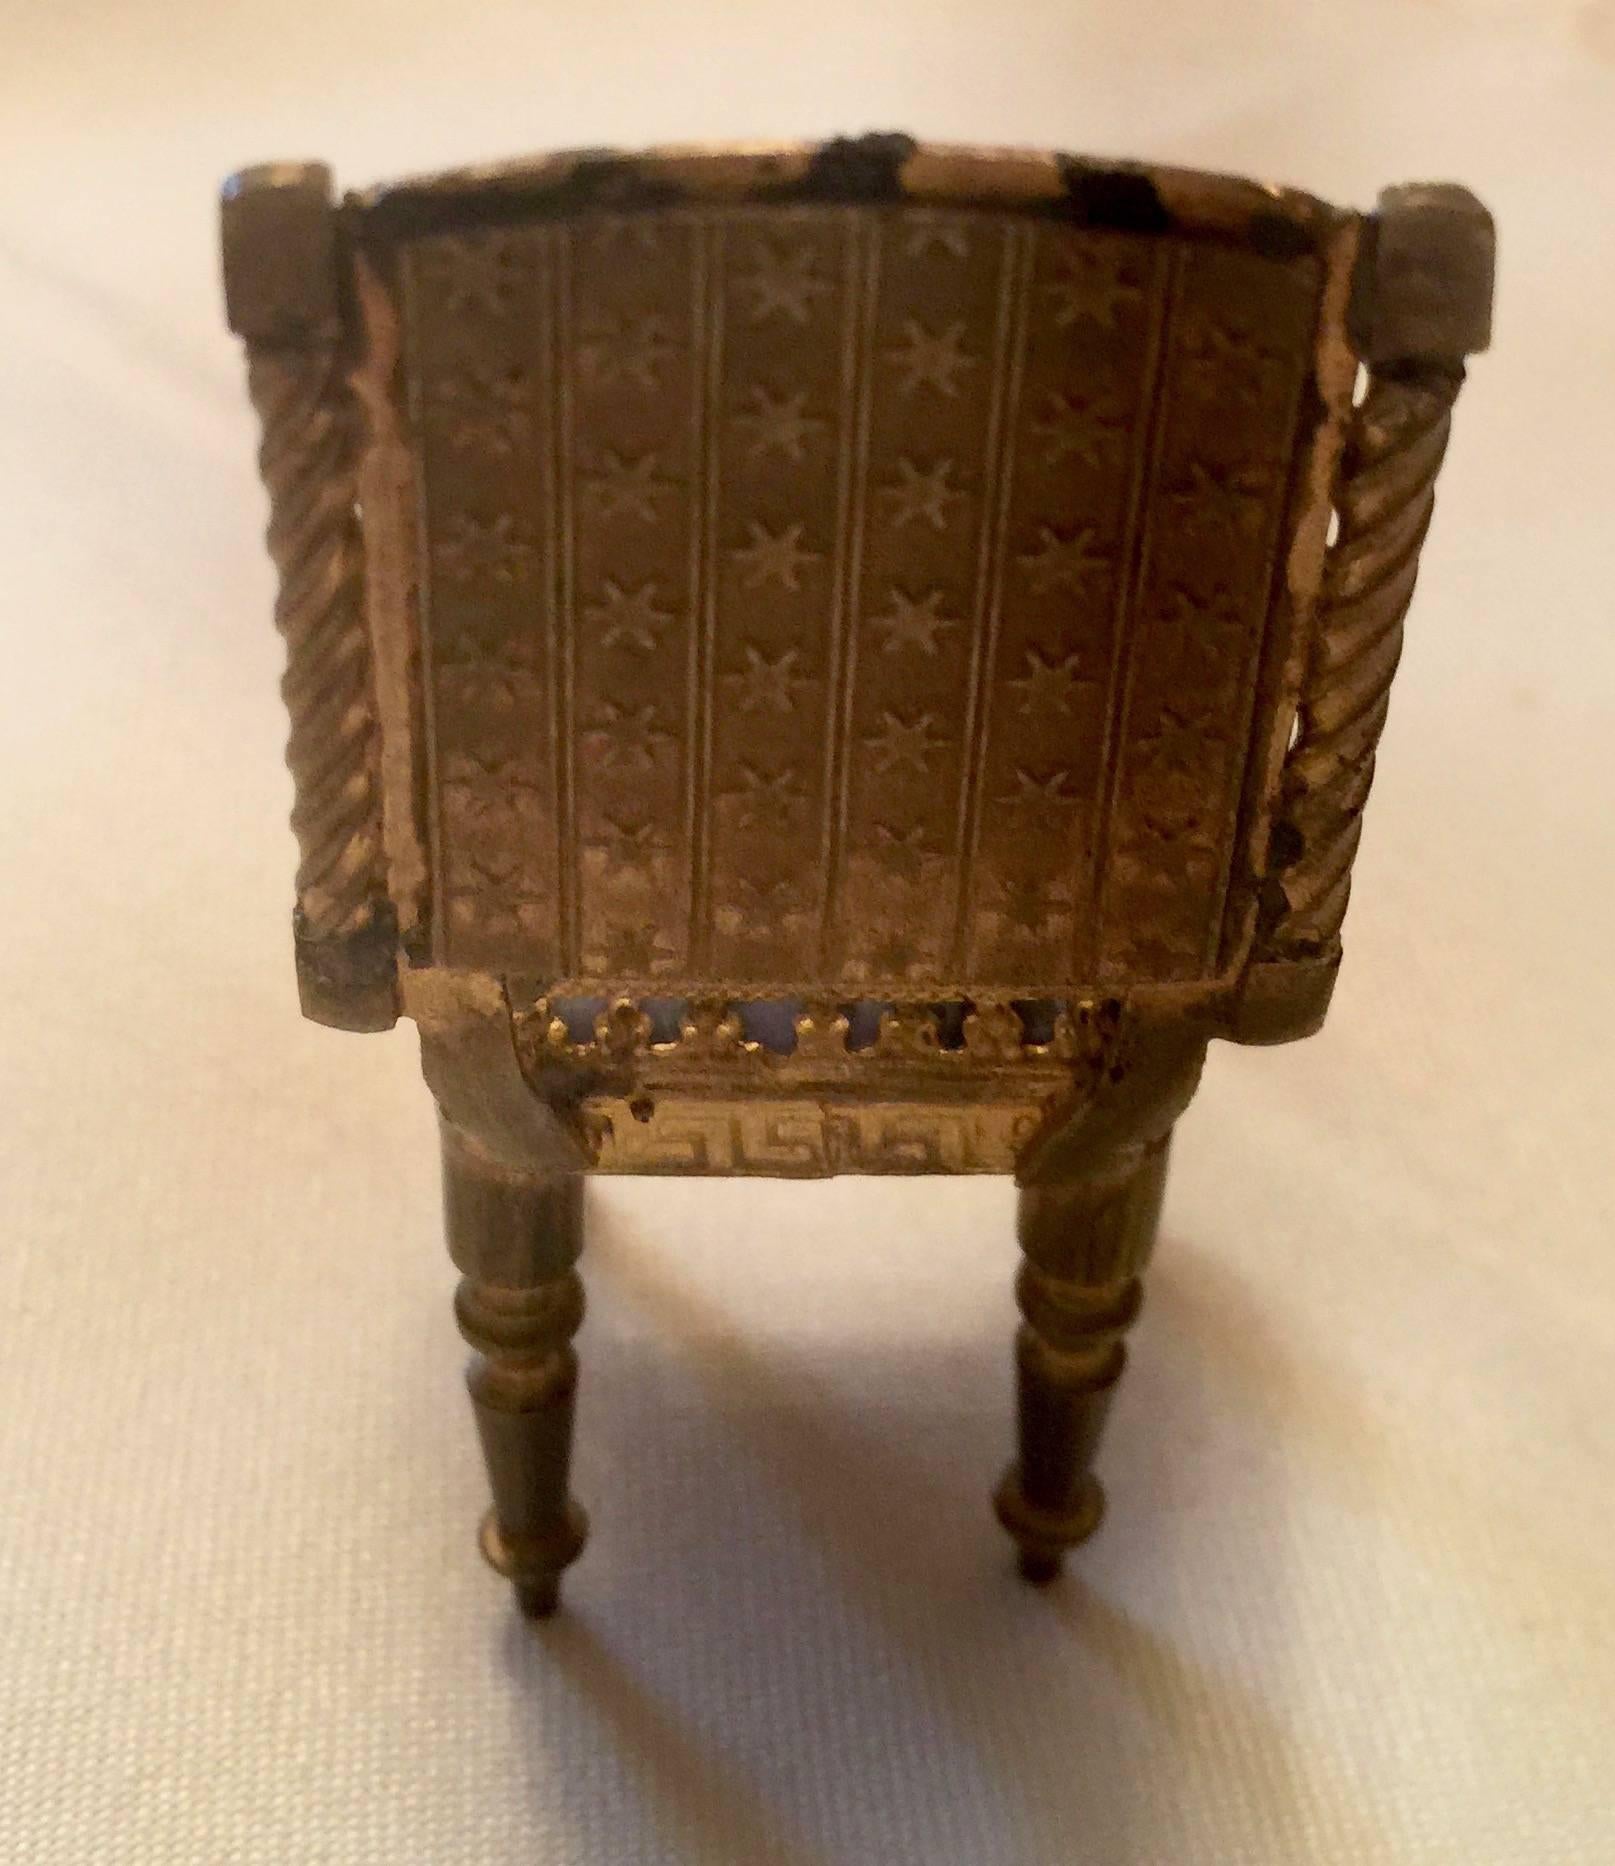 Austrian 19th Century Viennese Enamel and Bronze Miniature Chair For Sale